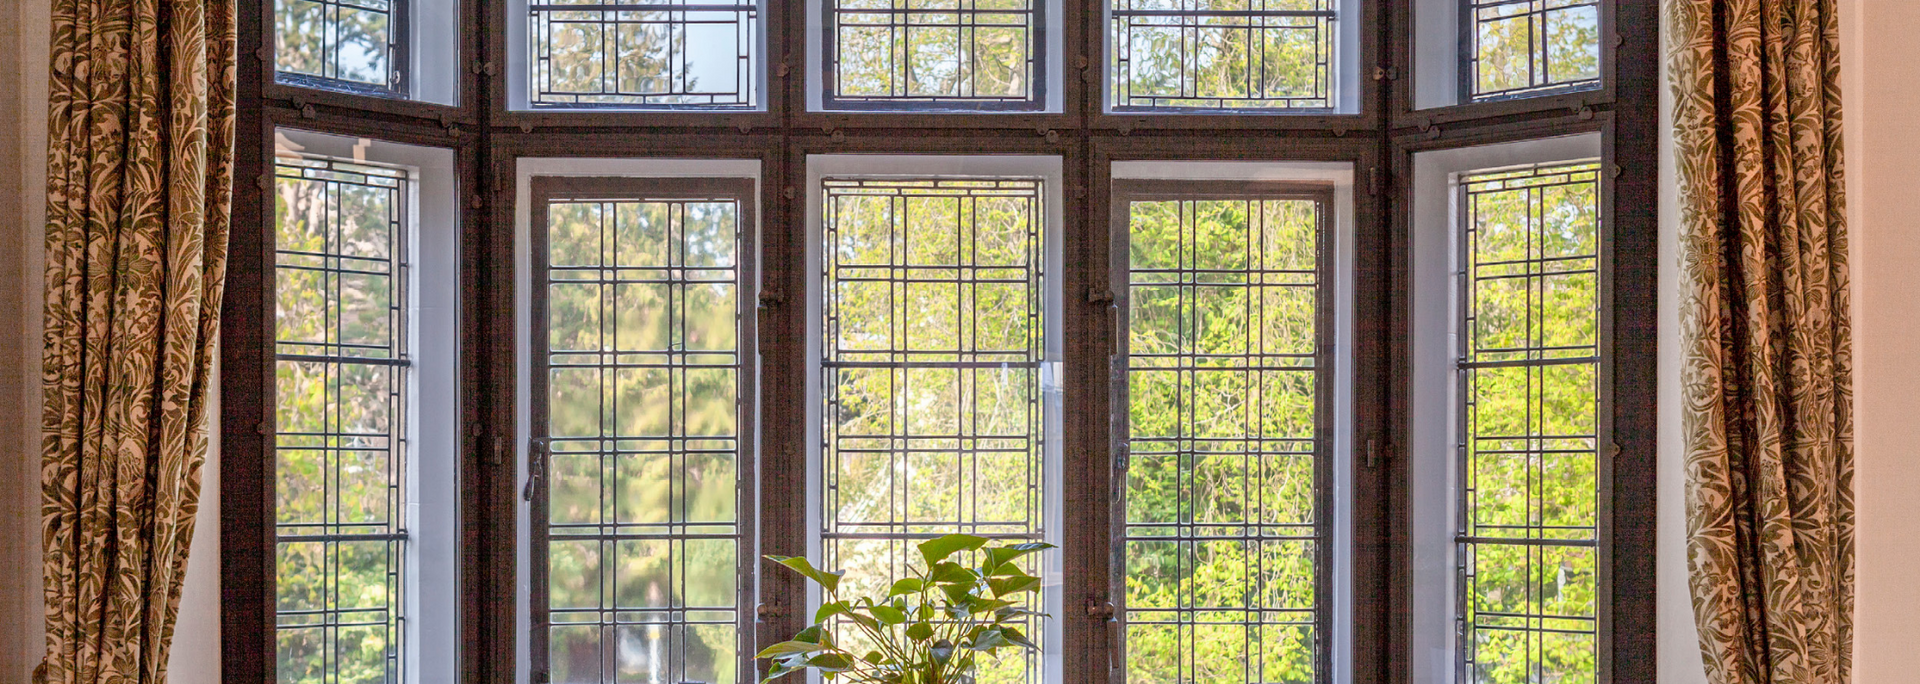 Picture of an example of secondary glazing